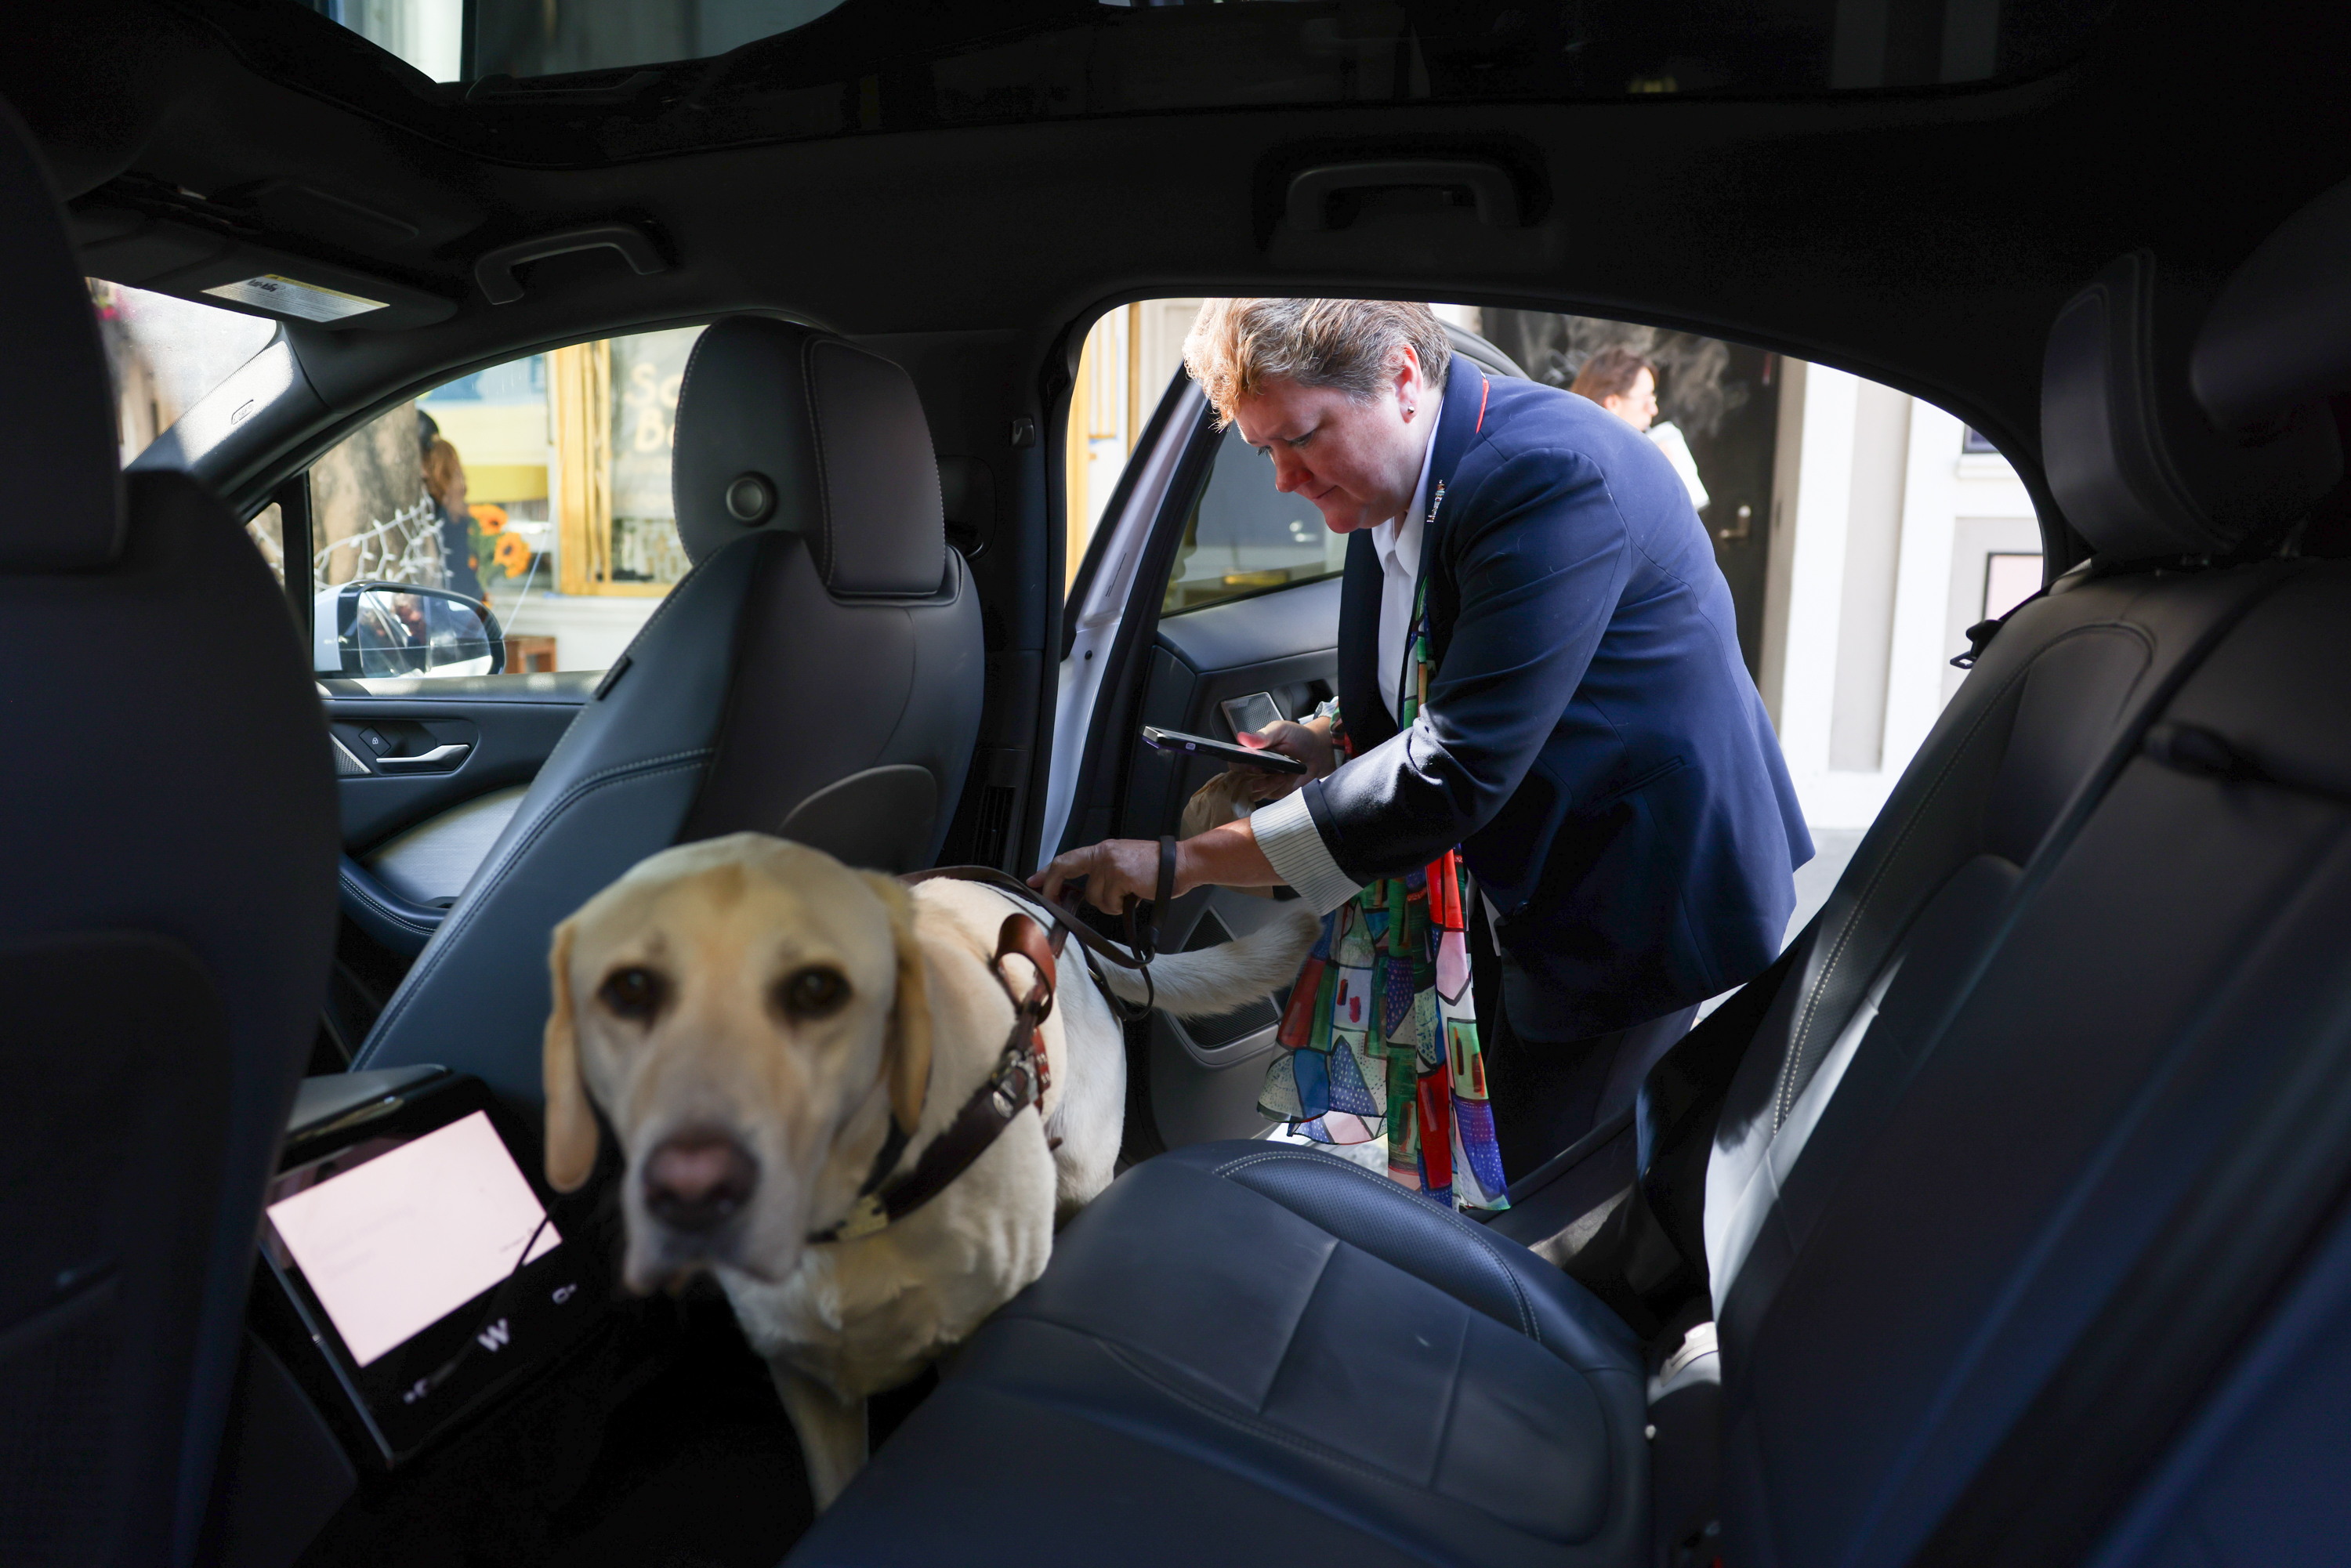 A person ducks into a vehicle with a seeing-eye dog.